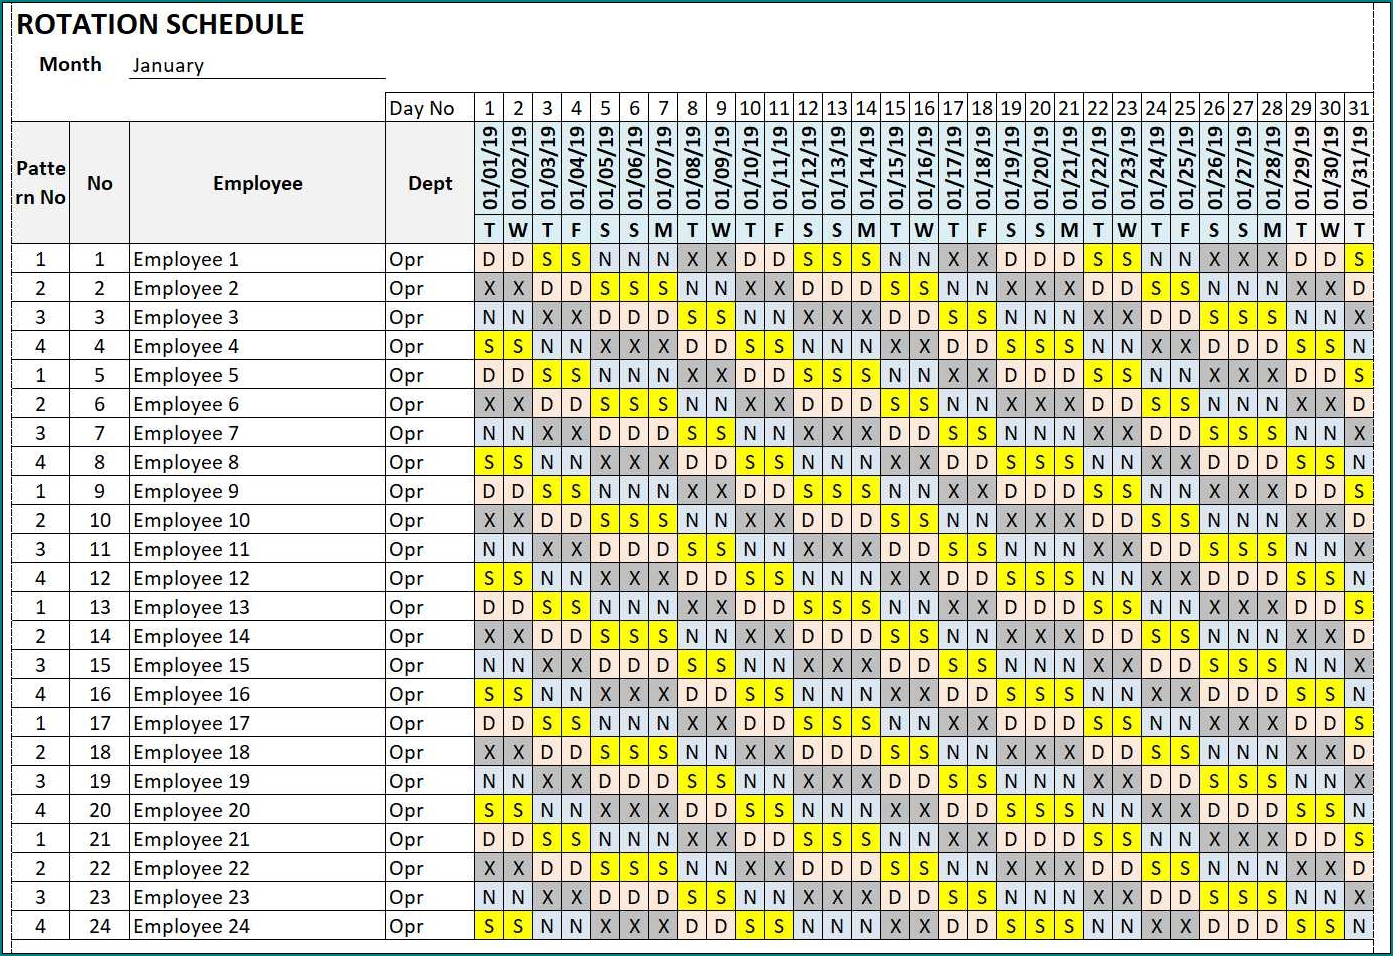 Take Printable 12 Hour Shift Schedule